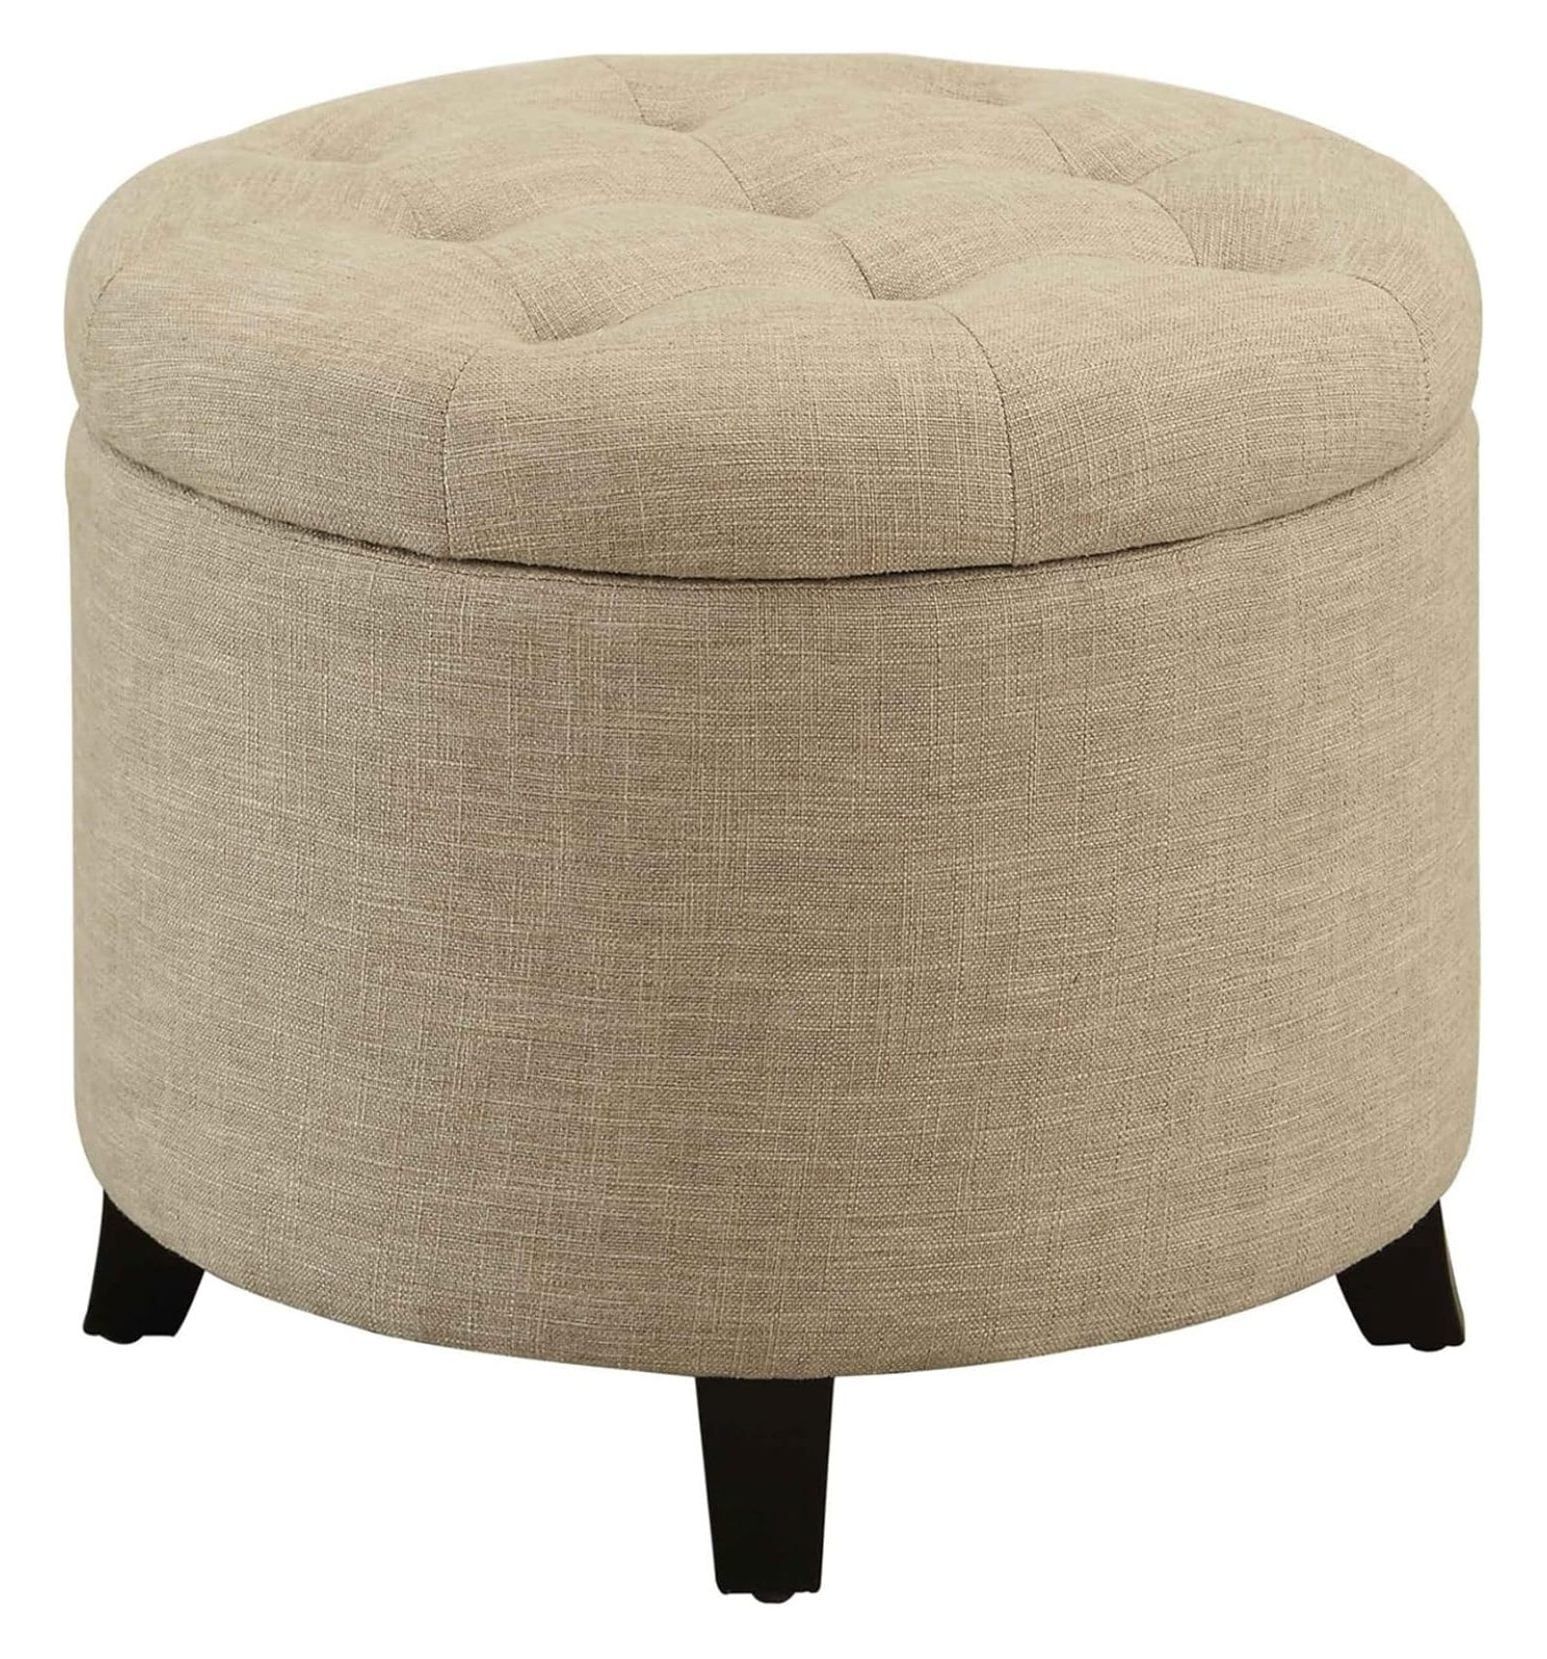 Tan Fabric Tufted Round Ottoman with Concealed Storage, 20"